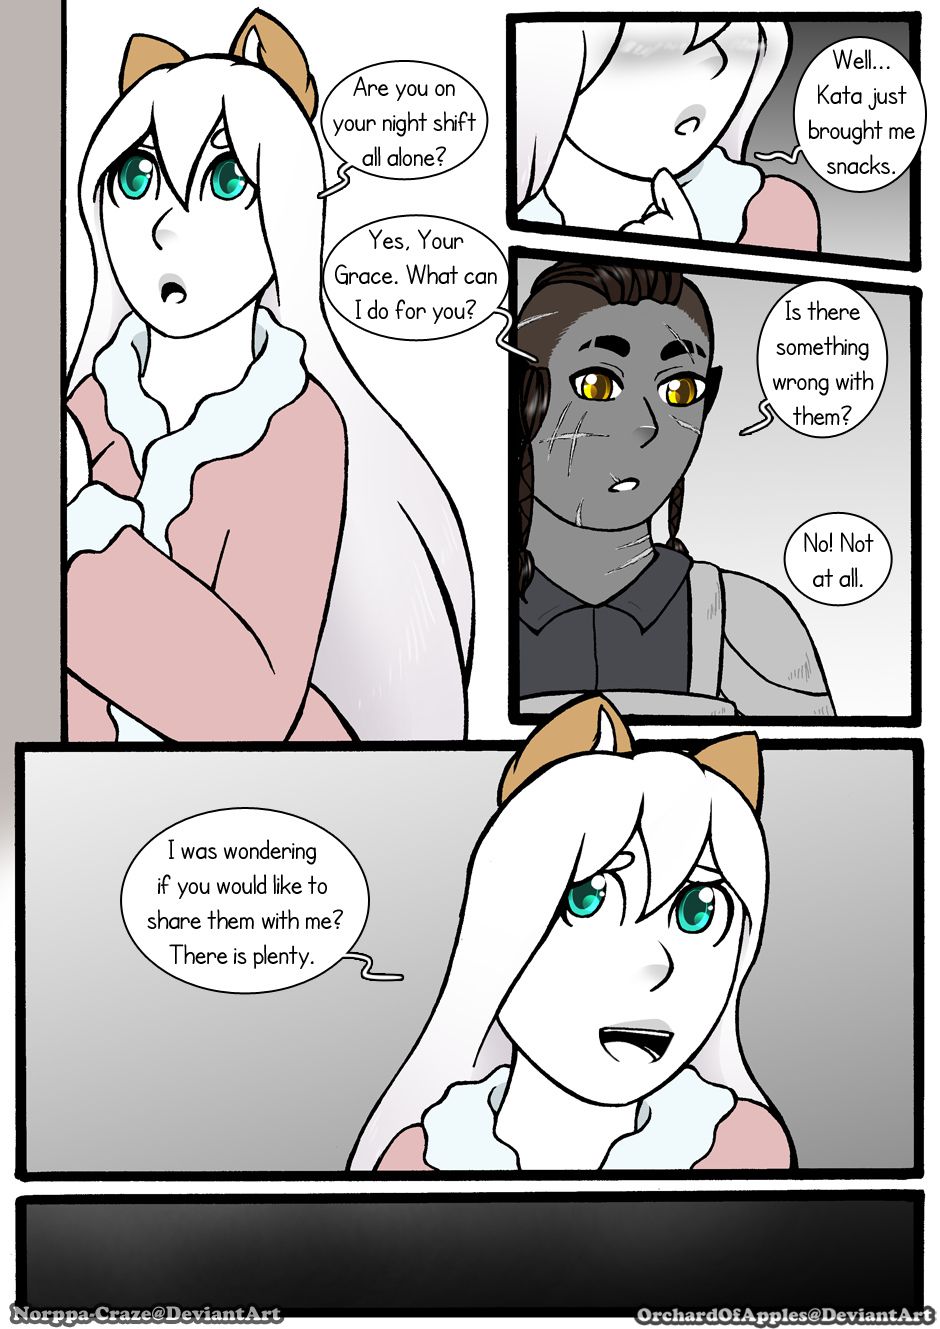 [Jeny-jen94] Between Kings and Queens [Ongoing] 305